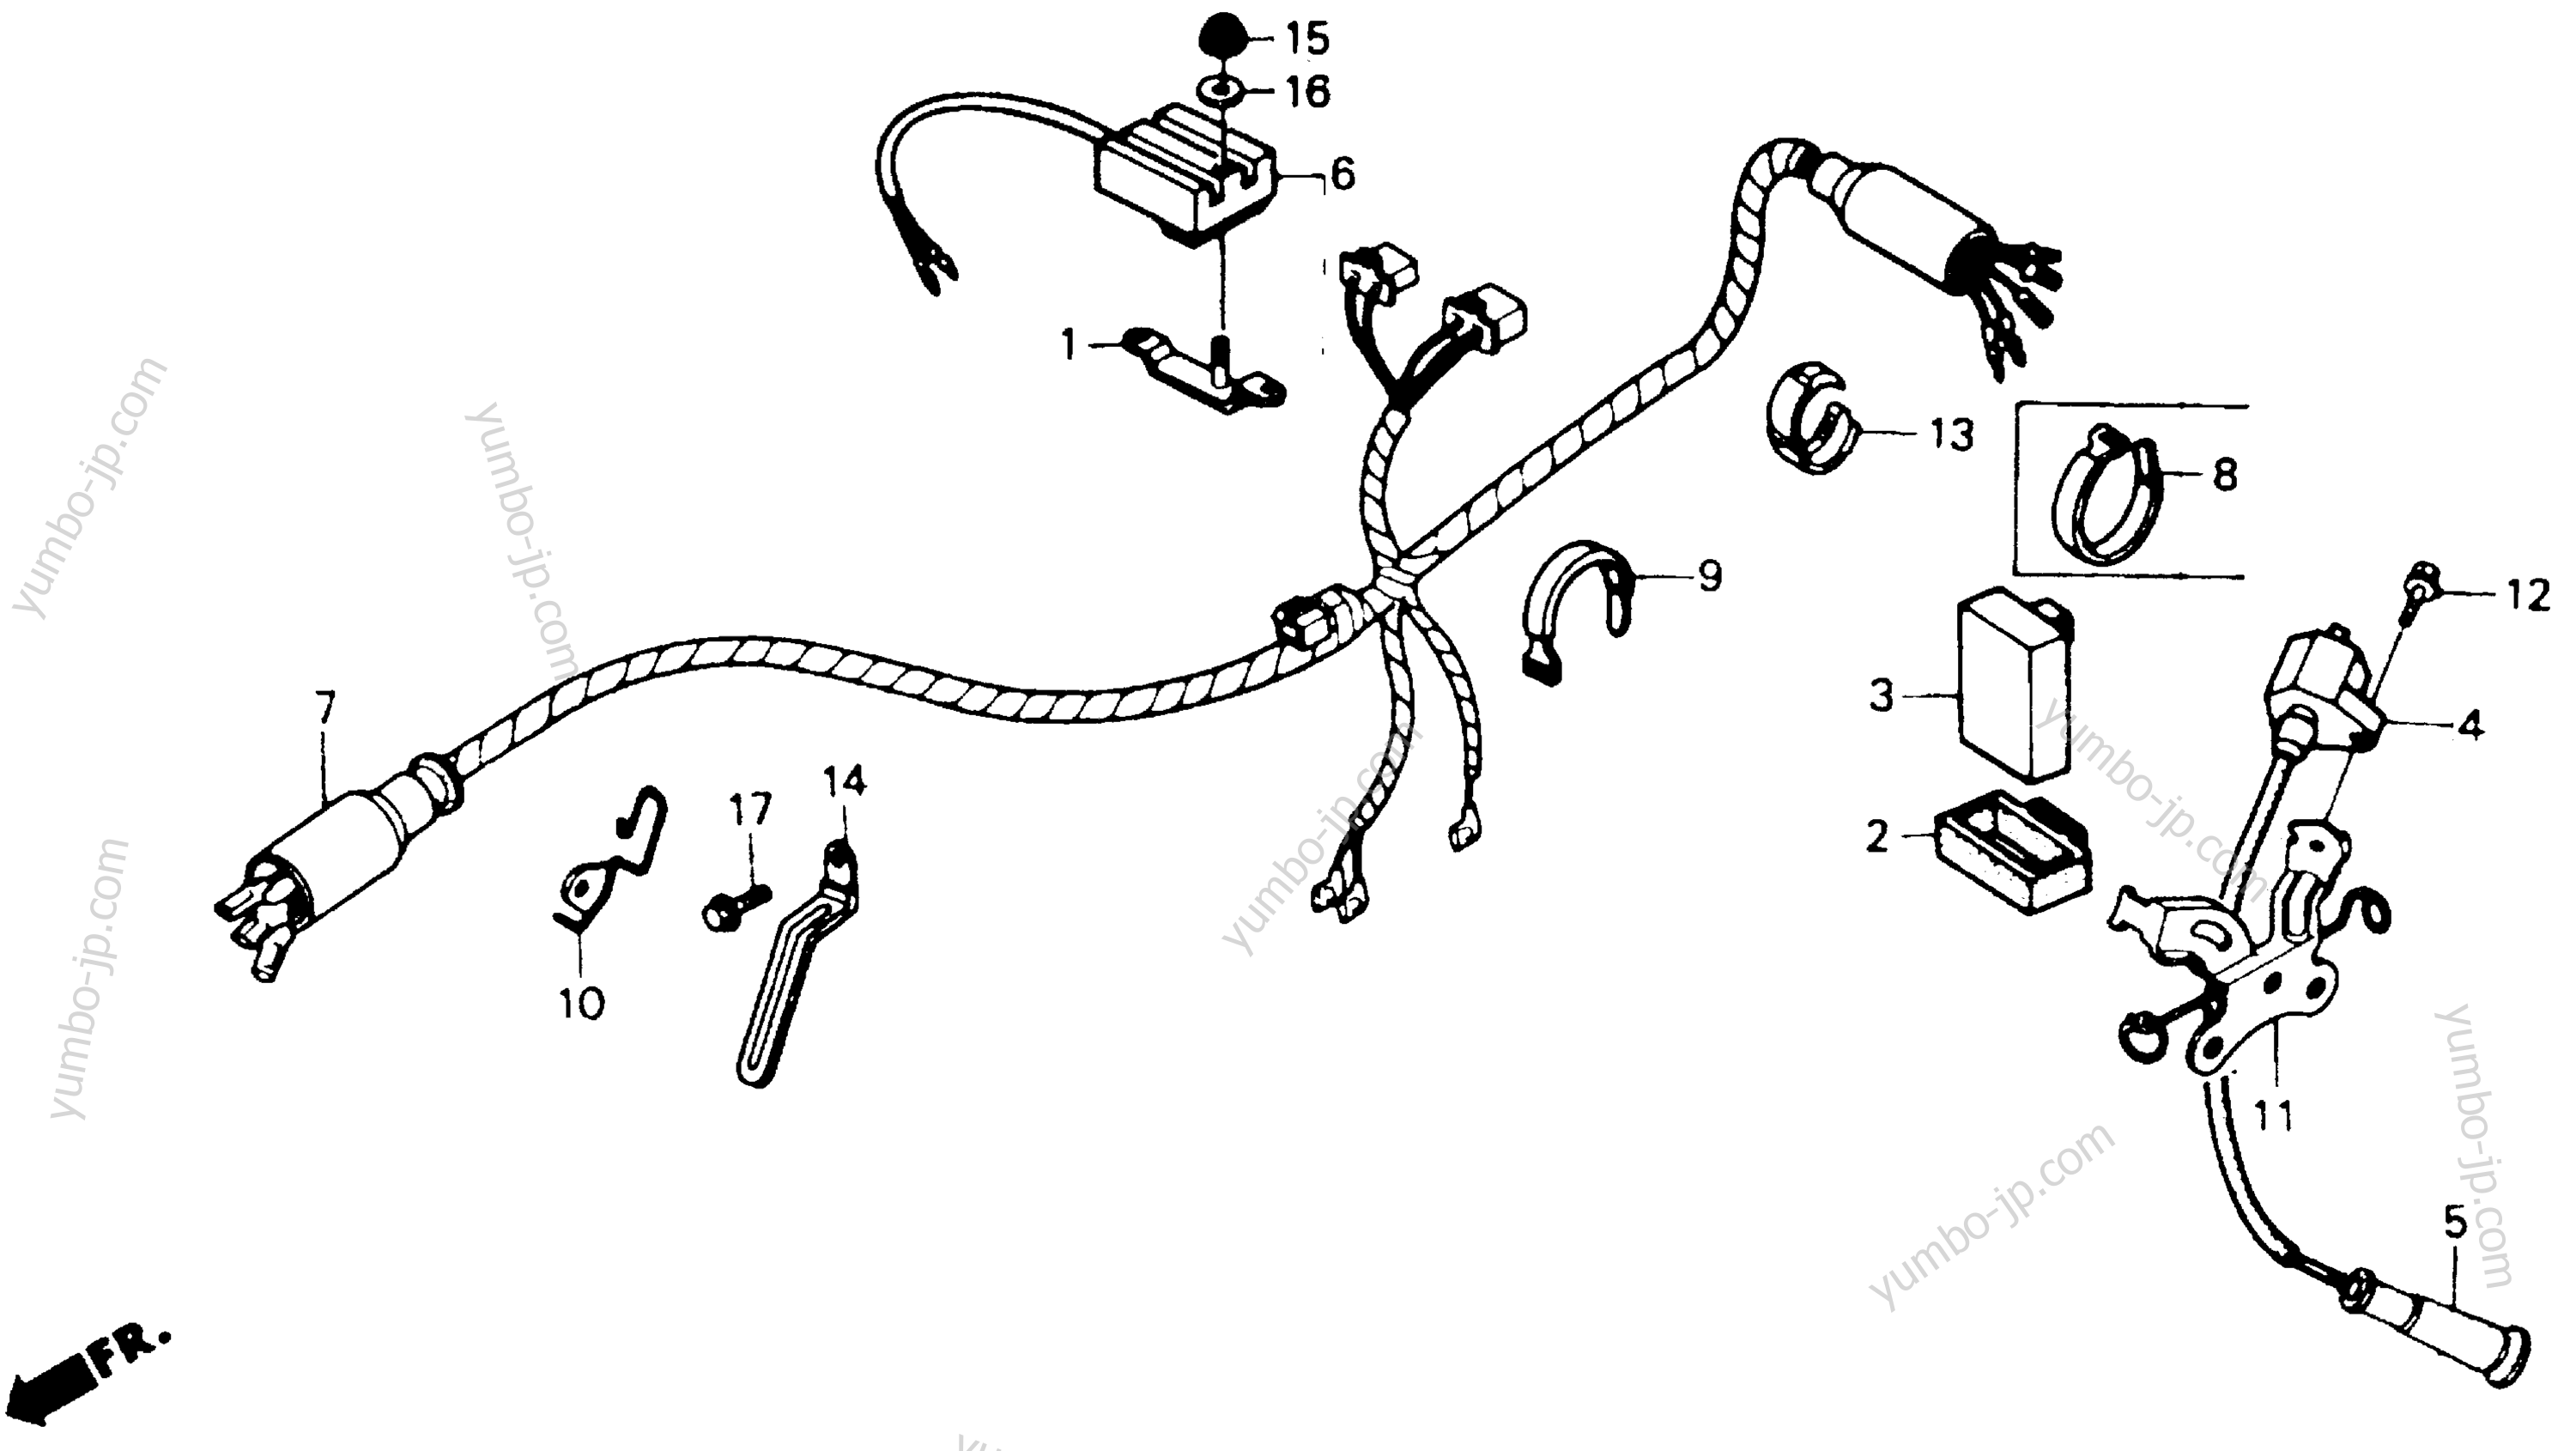 WIRE HARNESS for motorcycles HONDA XR600R A 1985 year